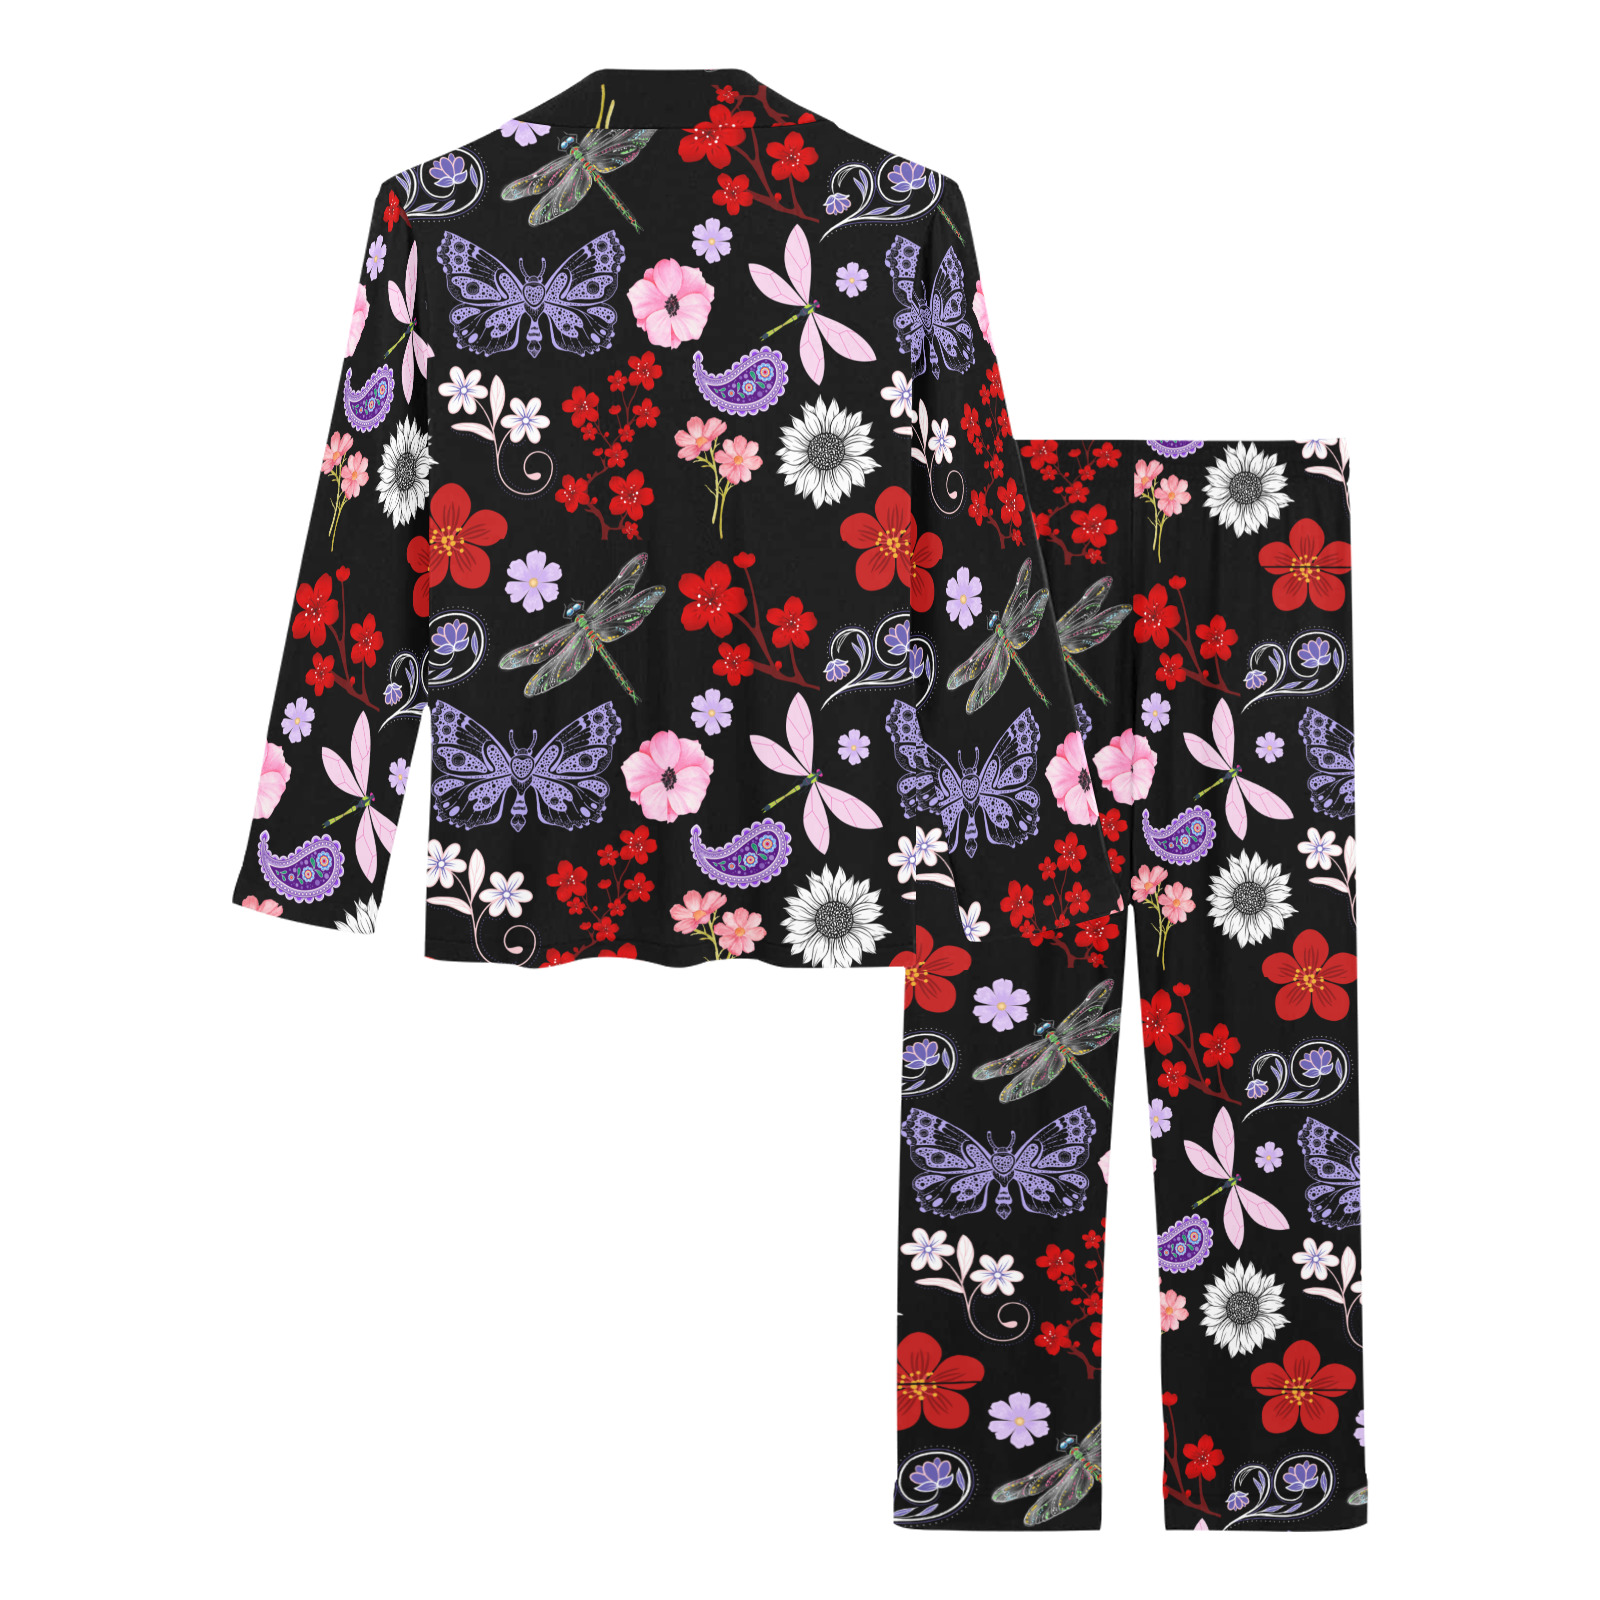 Black, Red, Pink, Purple, Dragonflies, Butterfly and Flowers Design Women's Long Pajama Set